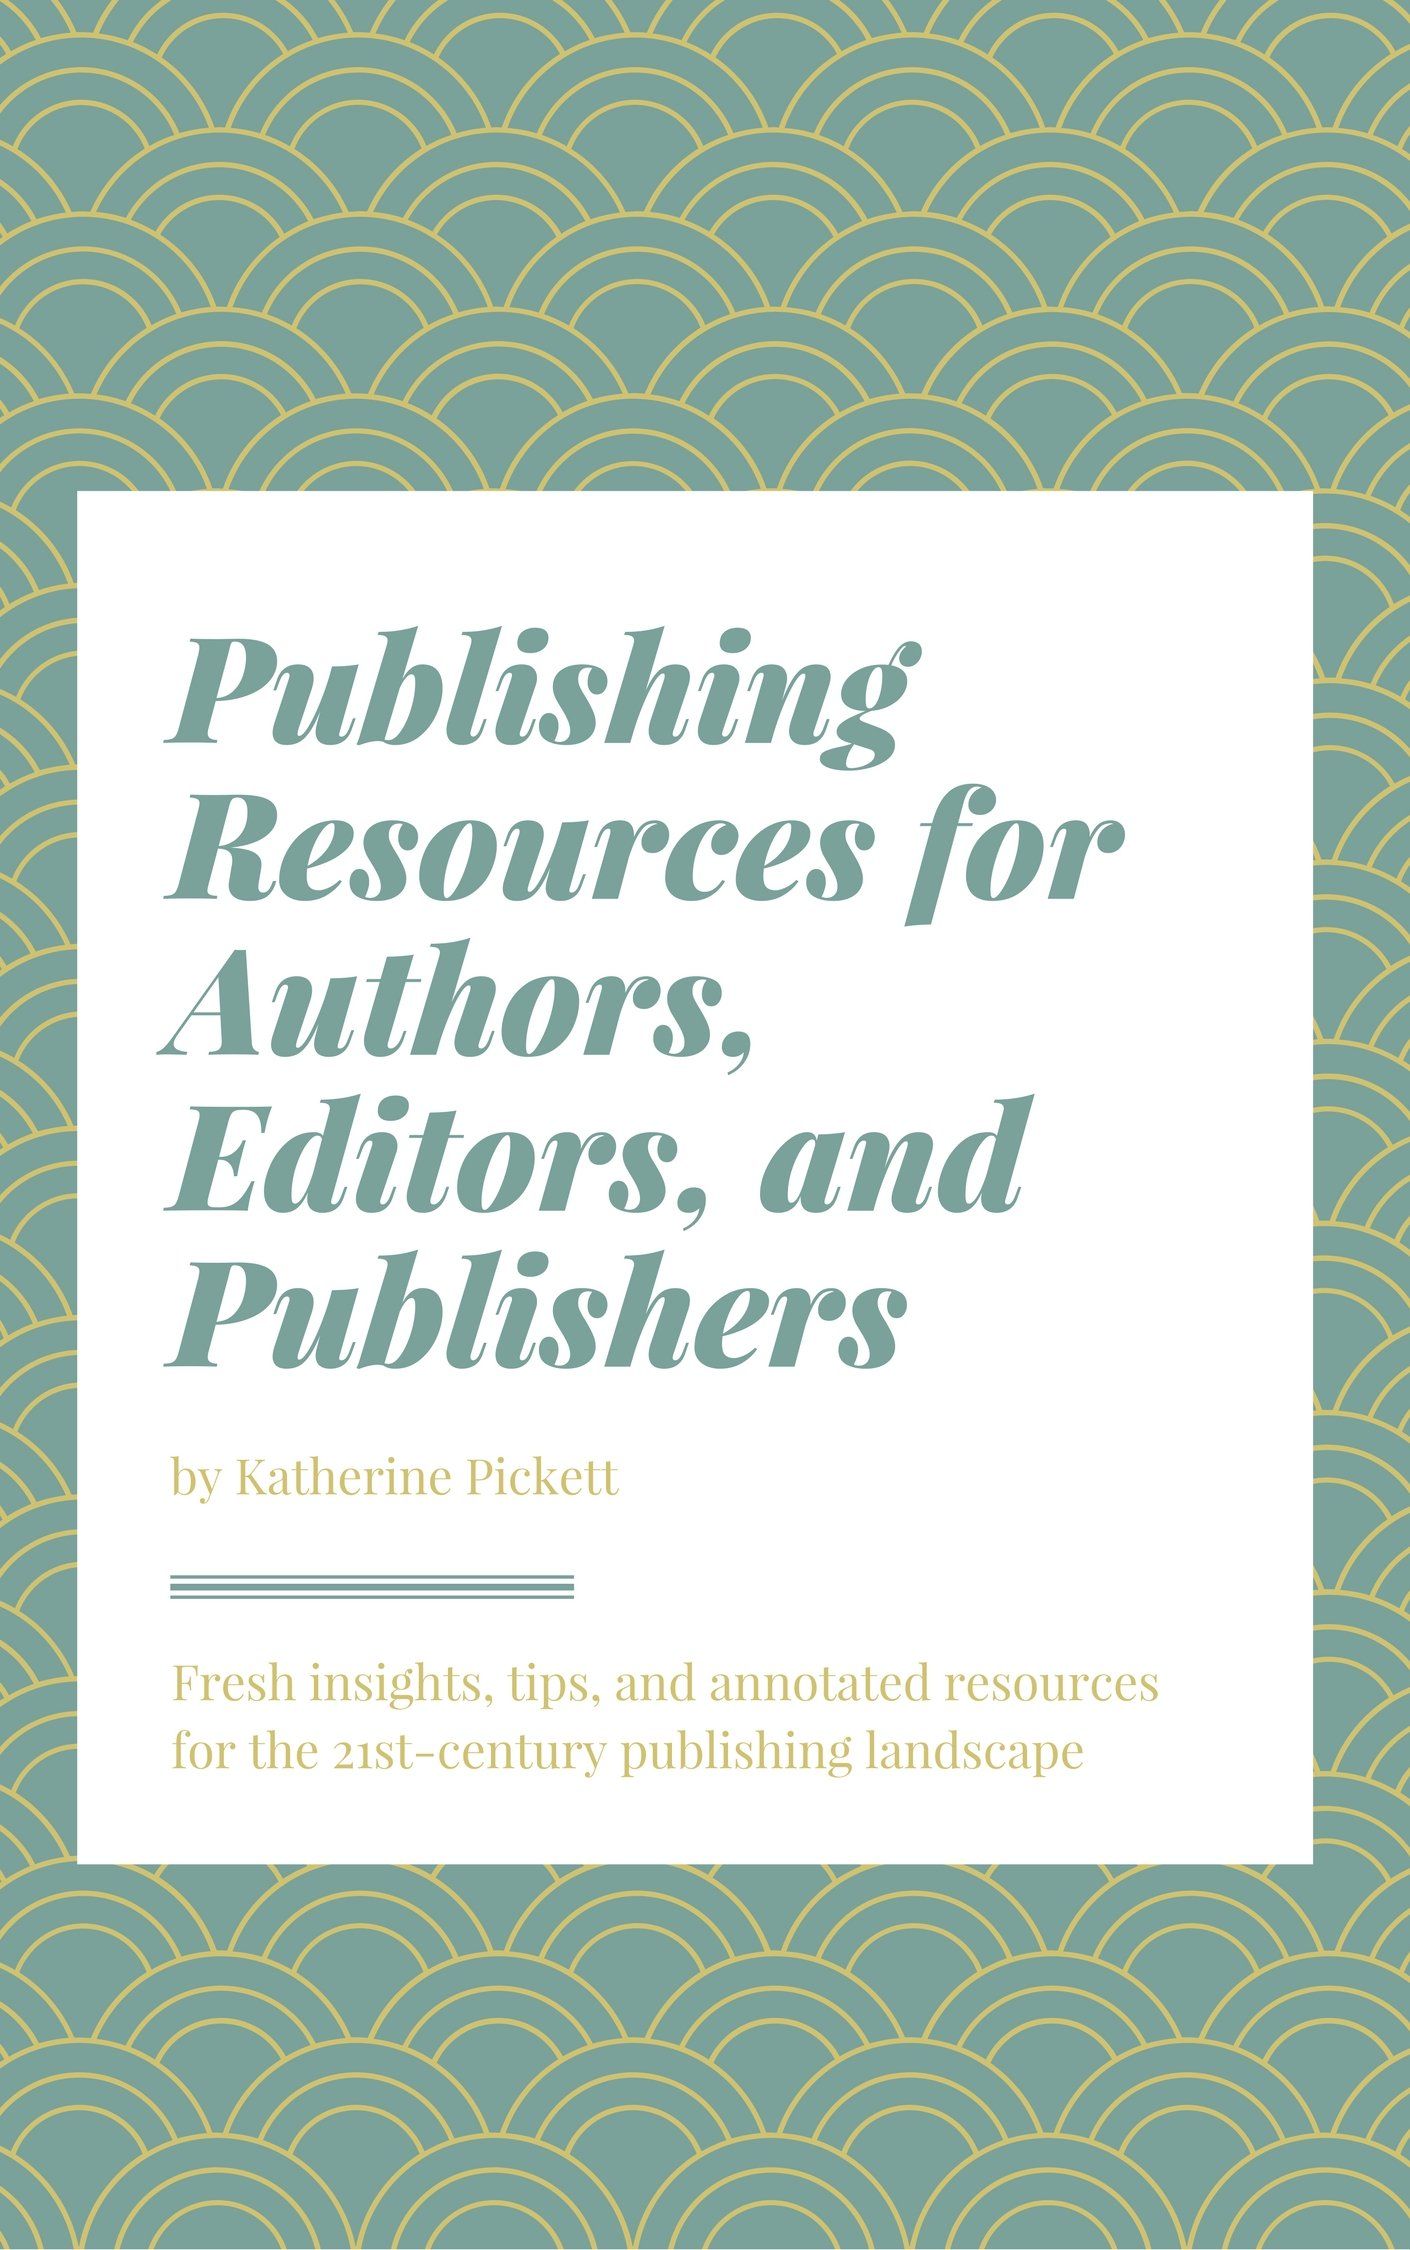 Publishing Resources for Authors, Editors, and Publishers